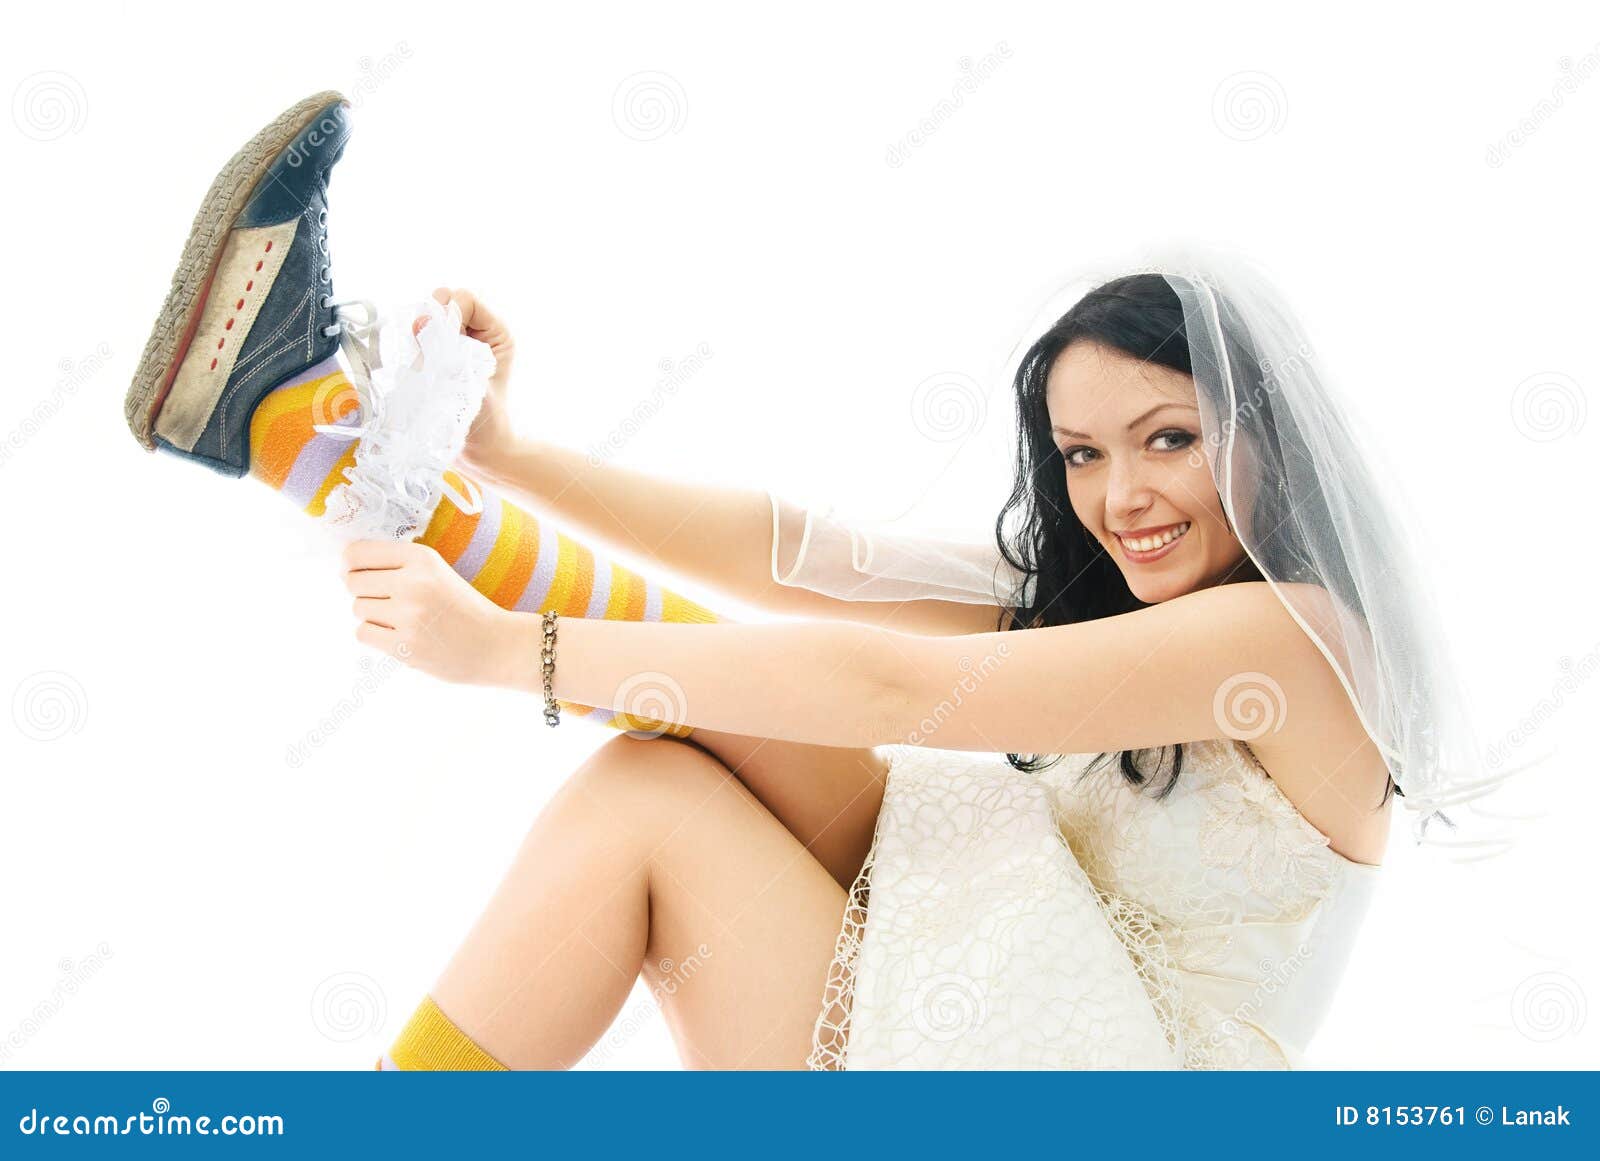 bride wearing sporting shoes puts on a garter